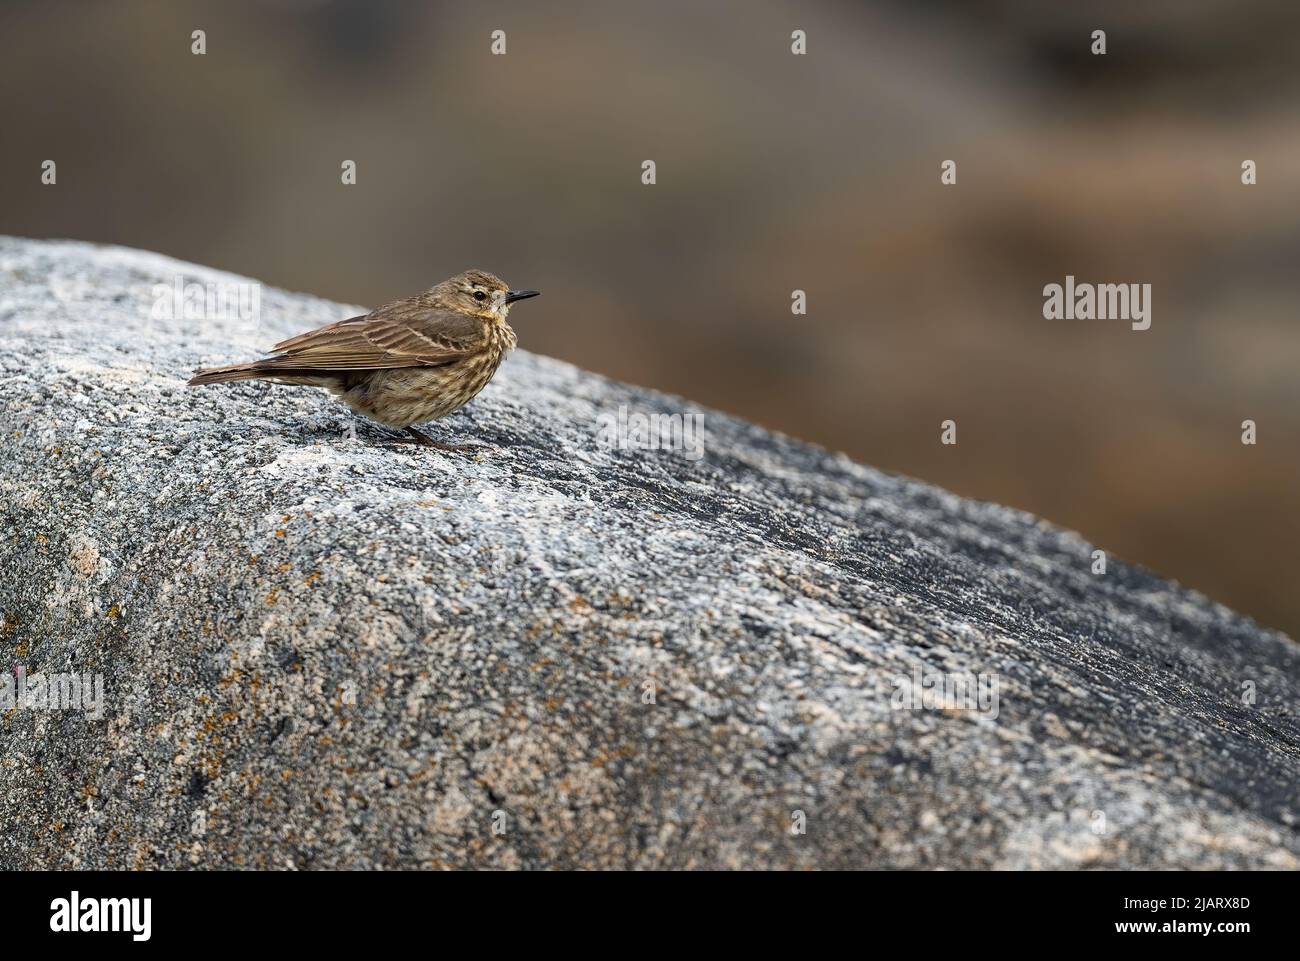 European Rock Pipit - Anthus petrosus, small brown perching bird from European sea and ocean coasts and cliffs, Runde island, Norway. Stock Photo